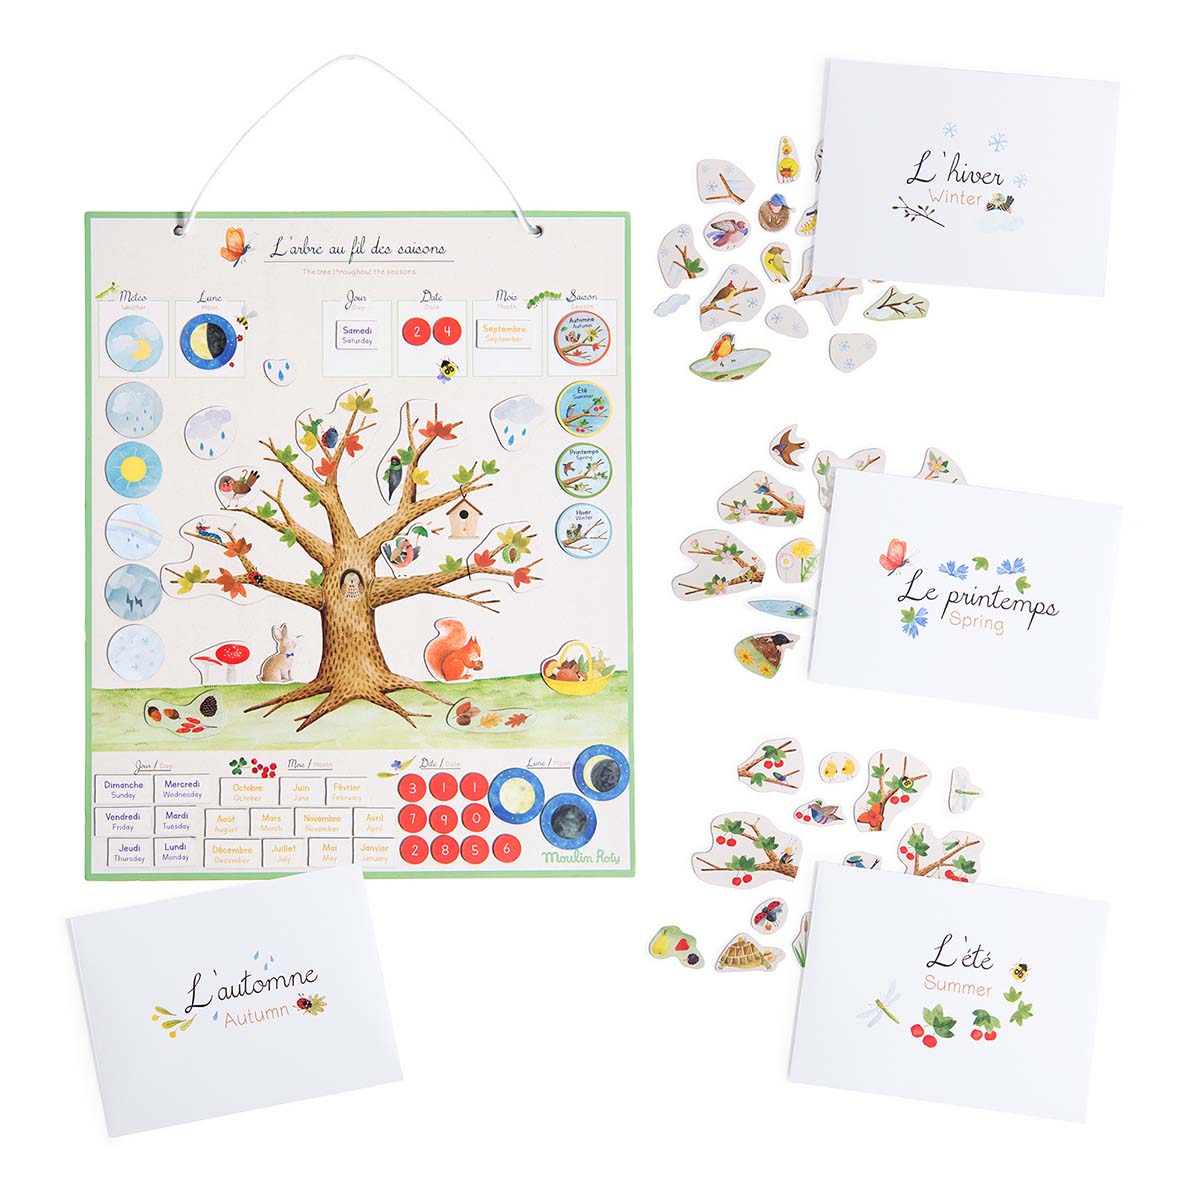 products/MoulinRoty_712403_Magneticcalender_FourSeasons_02.jpg